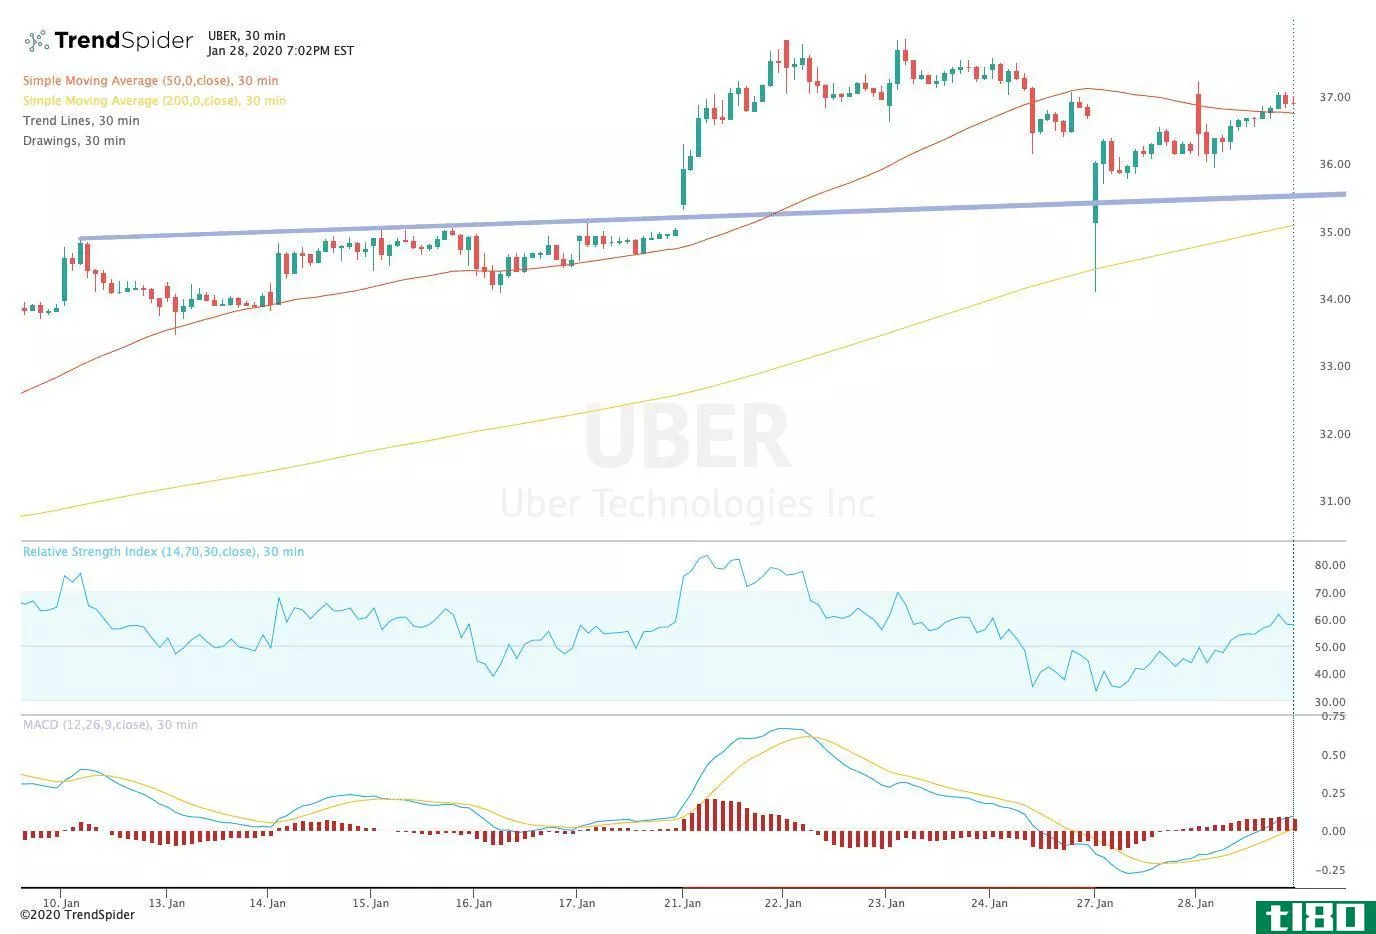 Chart showing the share price performance of Uber Technologies, Inc. (UBER)